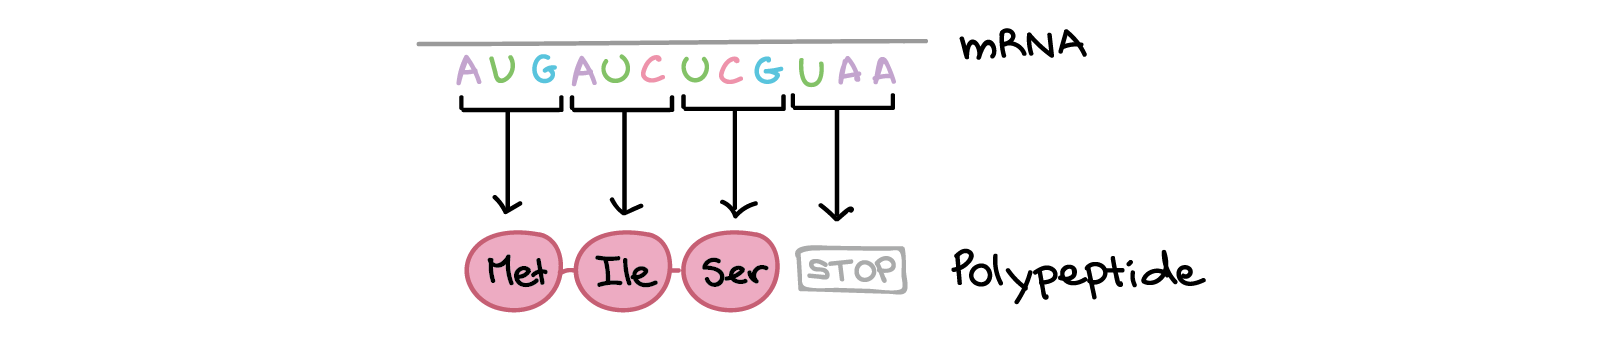  The mRNA sequence is:

5'-AUGAUCUCGUAA-5'

Translation involves reading the mRNA nucleotides in groups of three; each group specifies an amino acid (or provides a stop signal indicating that translation is finished).

3'-AUG AUC UCG UAA-5'

AUG $\rightarrow$ Methionine
AUC $\rightarrow$ Isoleucine
UCG $\rightarrow$ Serine
UAA $\rightarrow$ "Stop"

Polypeptide sequence: (N-terminus) Methionine-Isoleucine-Serine (C-terminus)